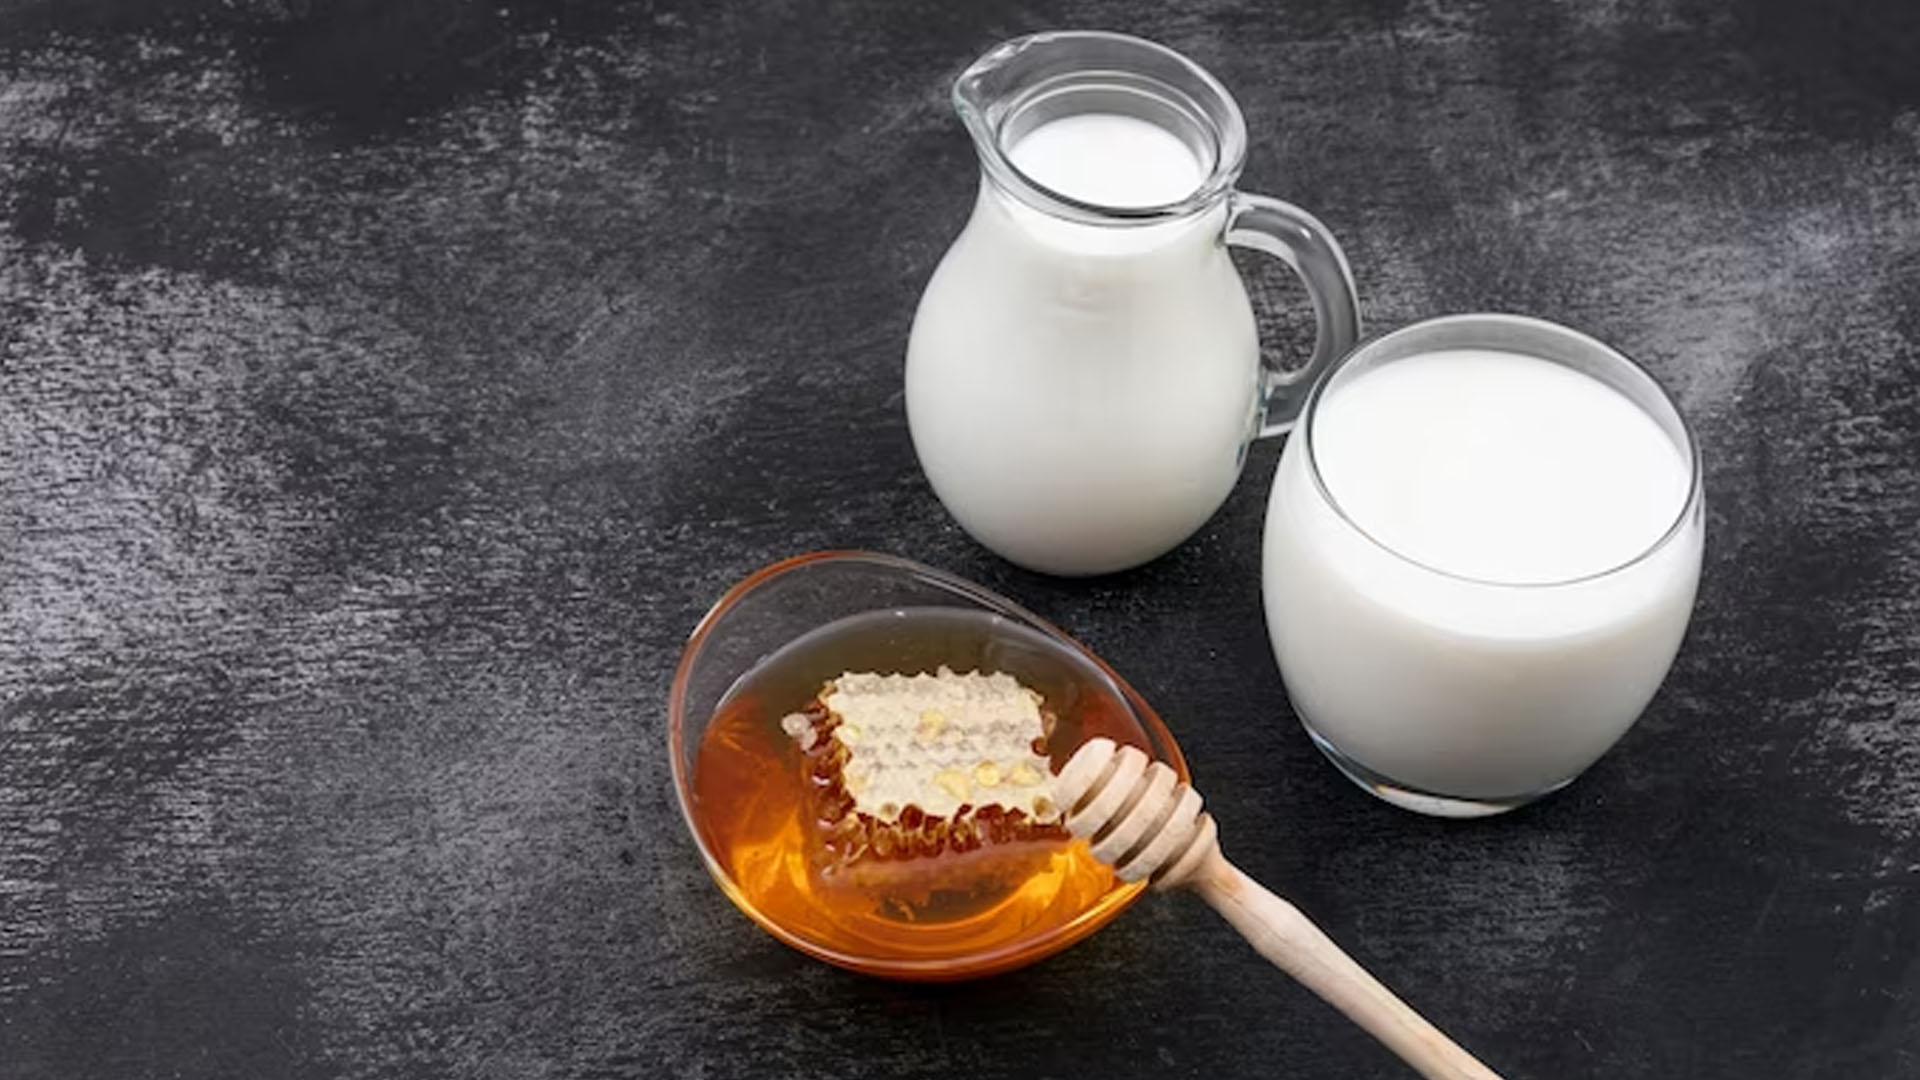 What Are The Health Benefits of Milk and Honey?